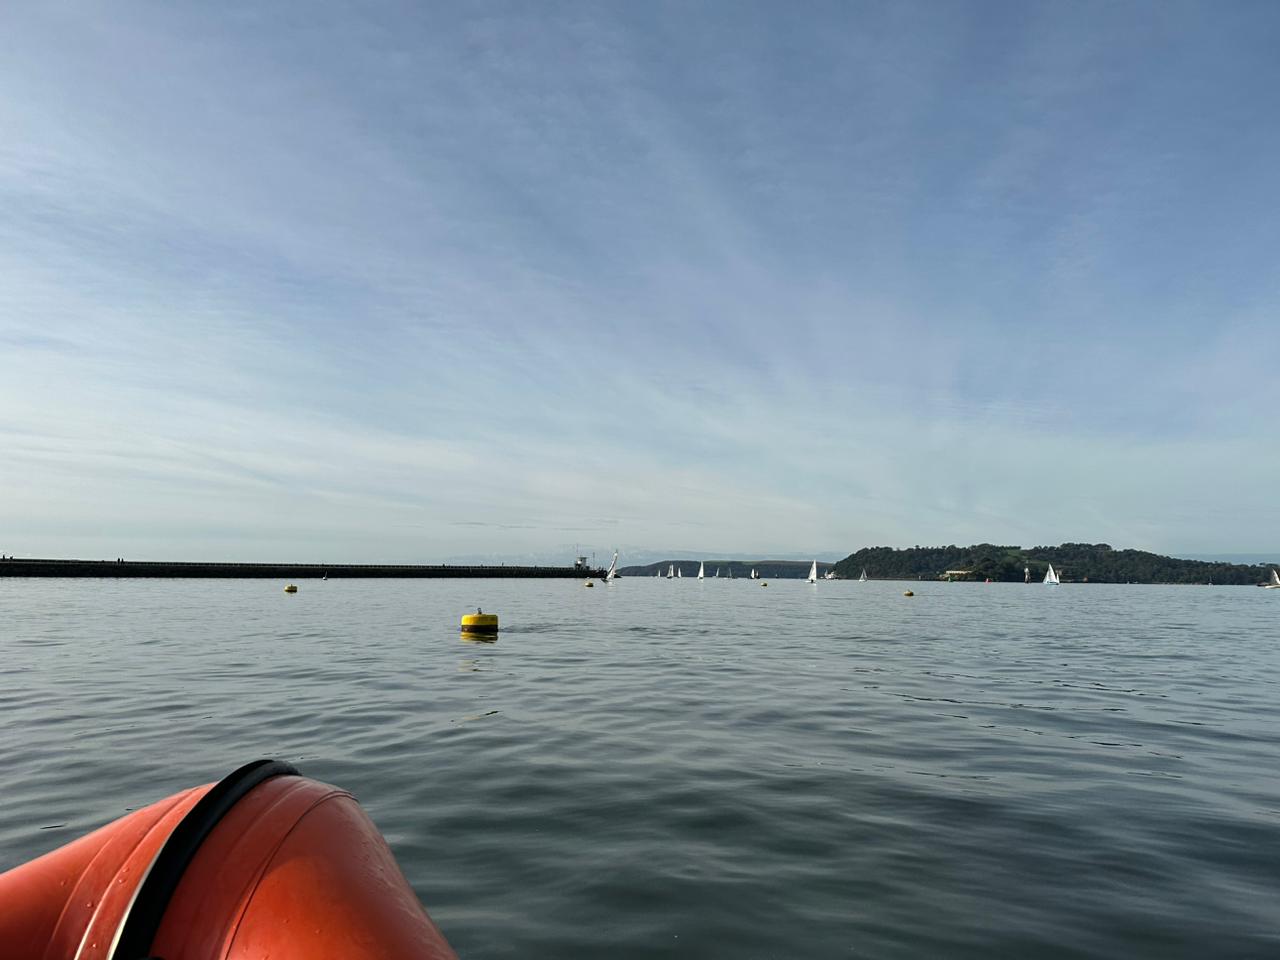 The Plymouth Sound, what a nice day!